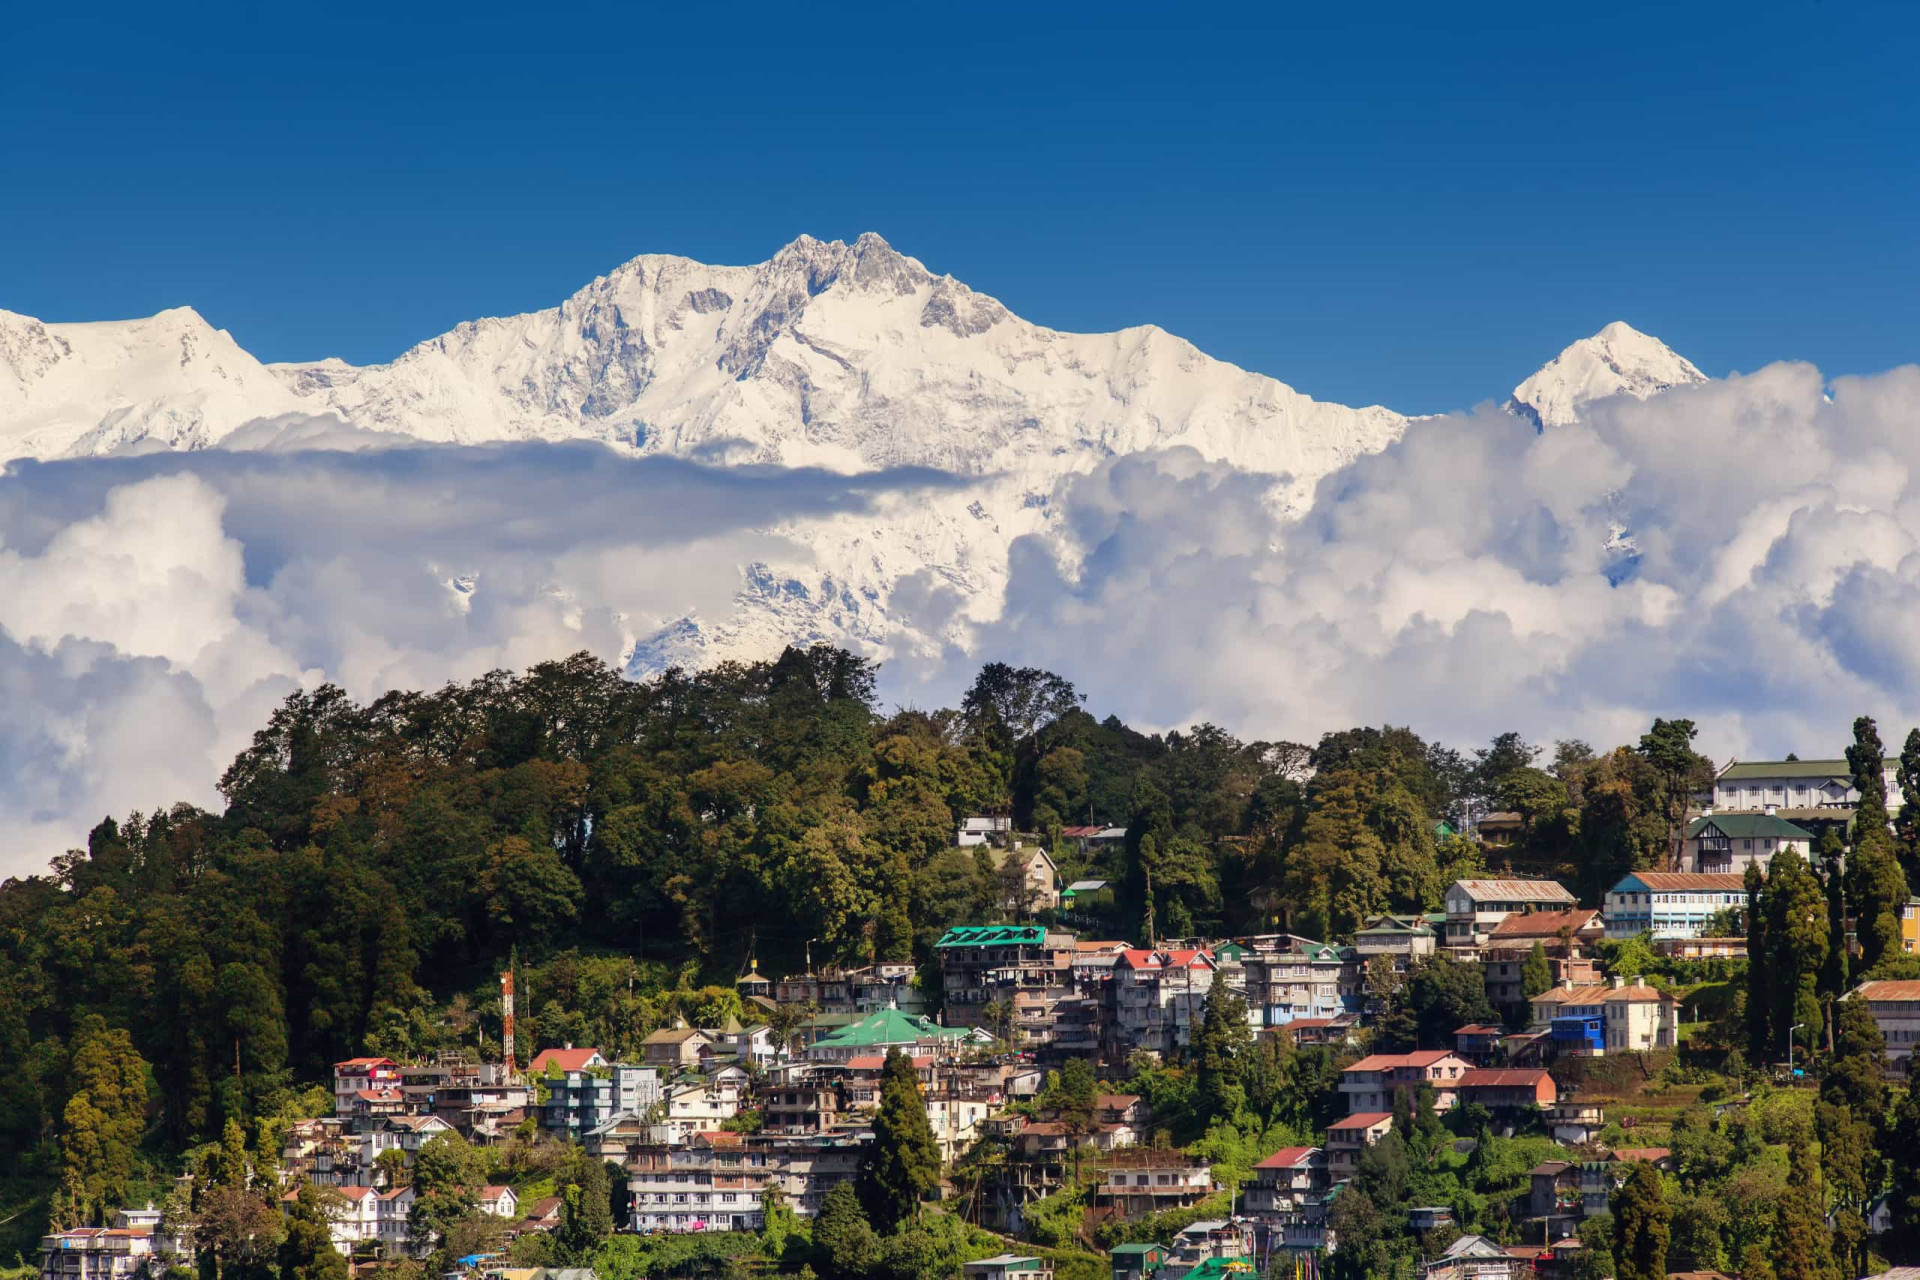 <p>World famous for its <a href="https://www.starsinsider.com/lifestyle/136590/30-fascinating-facts-about-tea" rel="noopener">tea</a> industry, Darjeeling is located in the state of West Bengal, in the Lesser Himalayas, at an elevation of 2,000 m (6,560 ft). It was developed as a hill station during the British Raj, and besides excellent tea provides visitors with astonishing views of the world's third highest mountain peak, Kanchenjunga.</p><p>You may also like:<a href="https://www.starsinsider.com/n/404127?utm_source=msn.com&utm_medium=display&utm_campaign=referral_description&utm_content=470081v2en-en"> Predictions from 1900 that did (and didn't) come true </a></p>